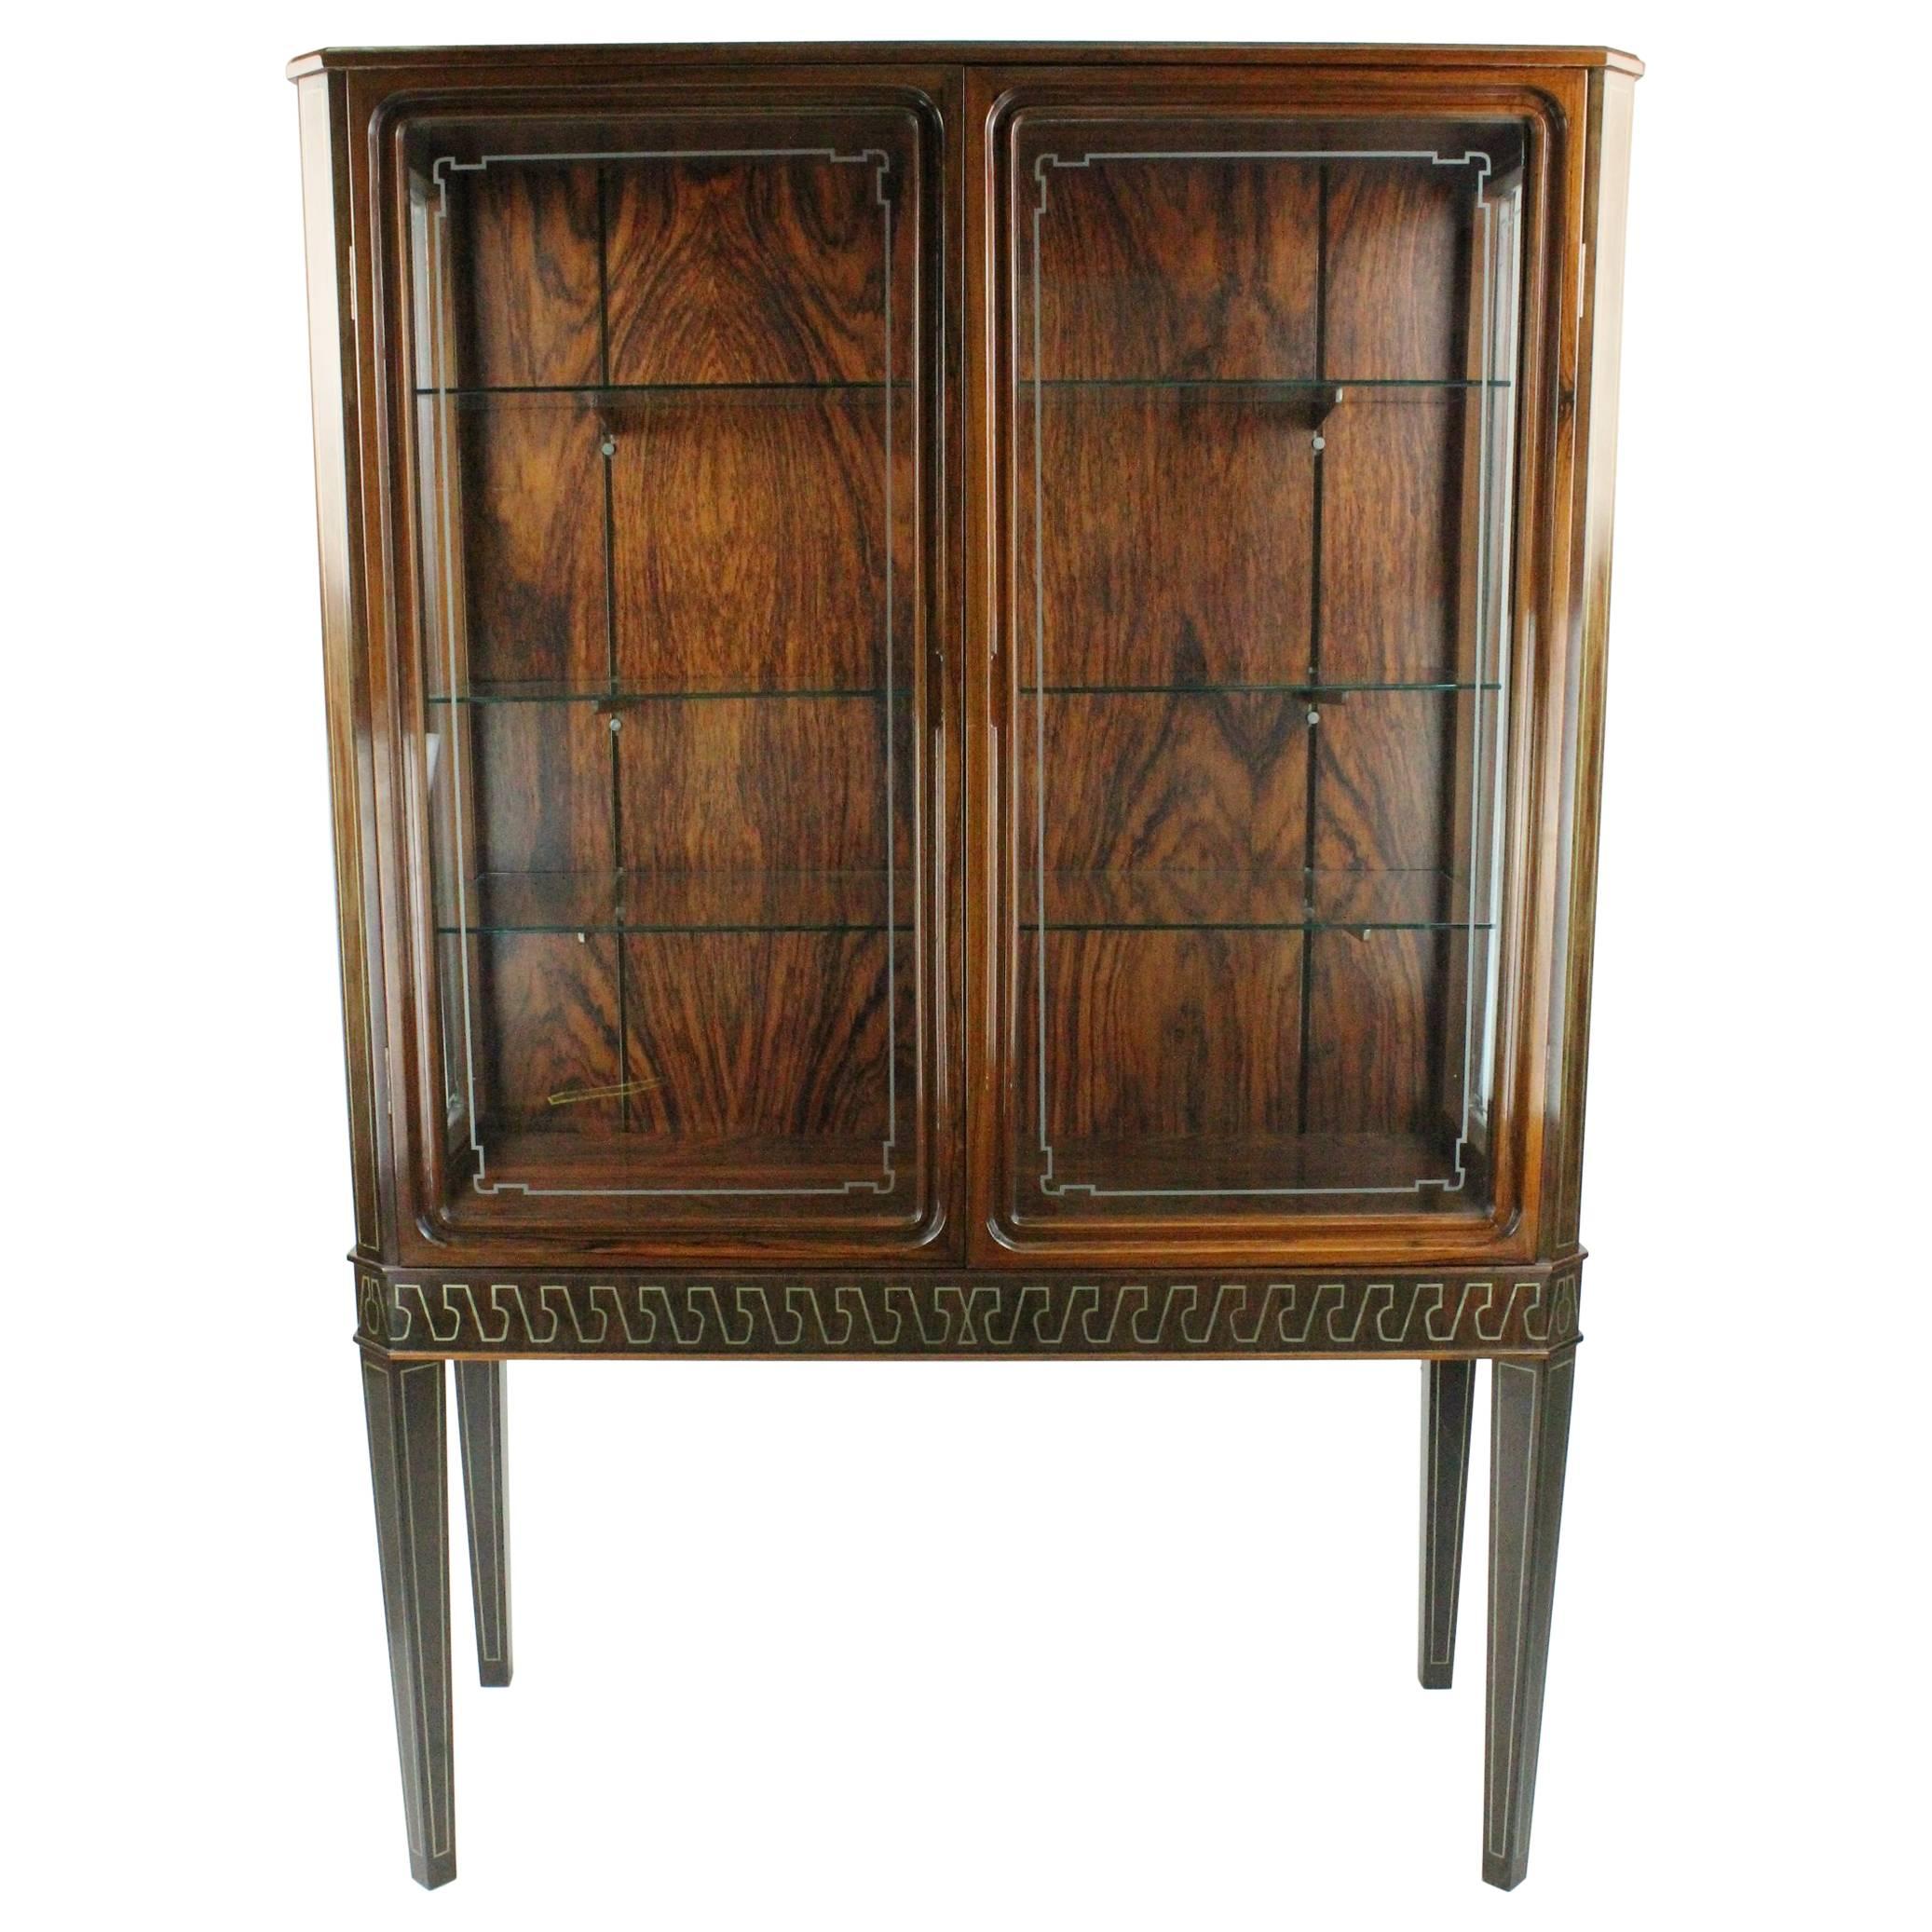 Very Rare 1940s European Rosewood and Pewter Inlaid Vitrine